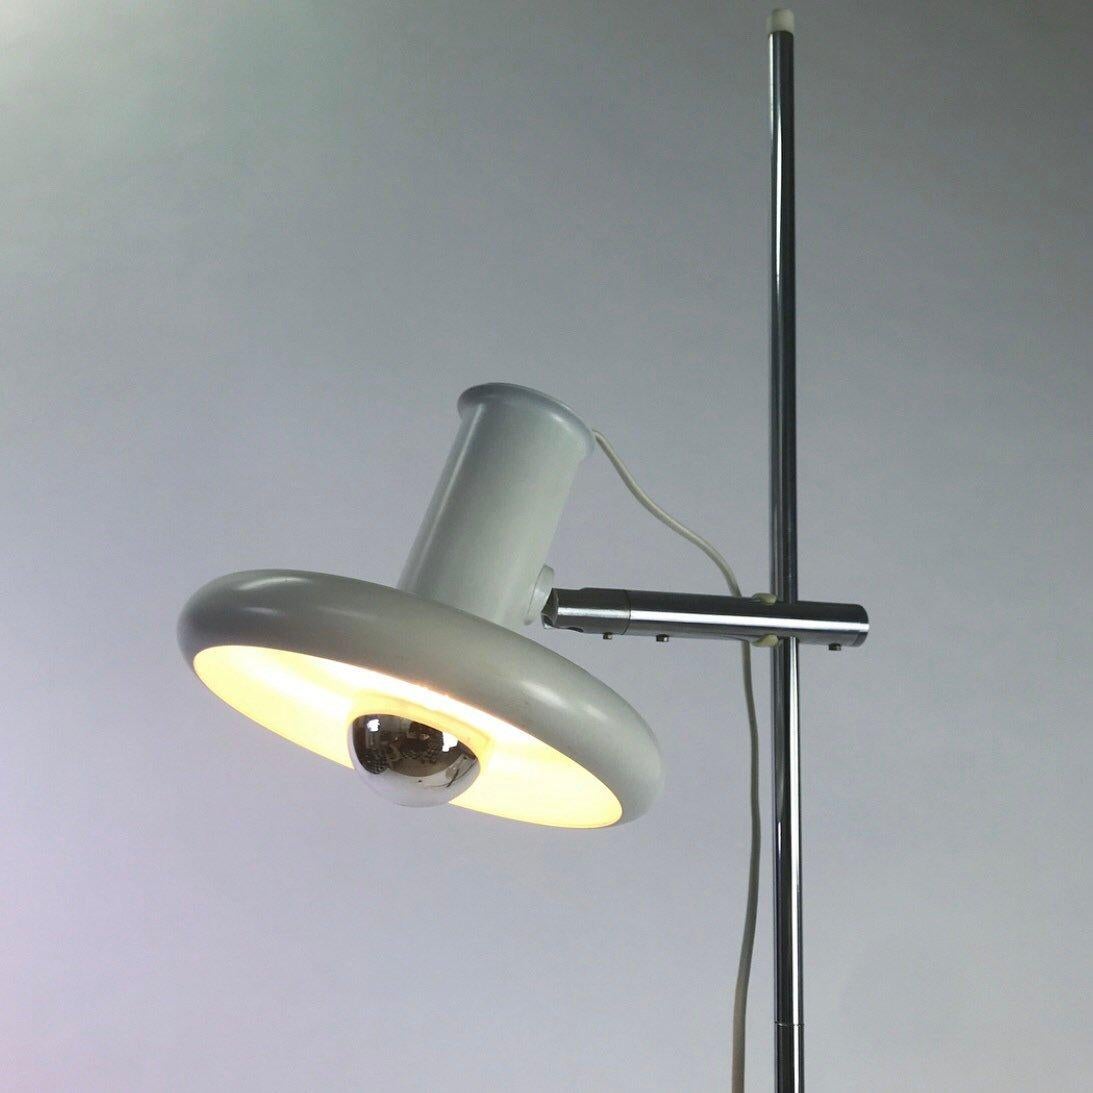 Classic Danish Floor Lamp from the 1970s by Hans Due for Fog & Mørup 3